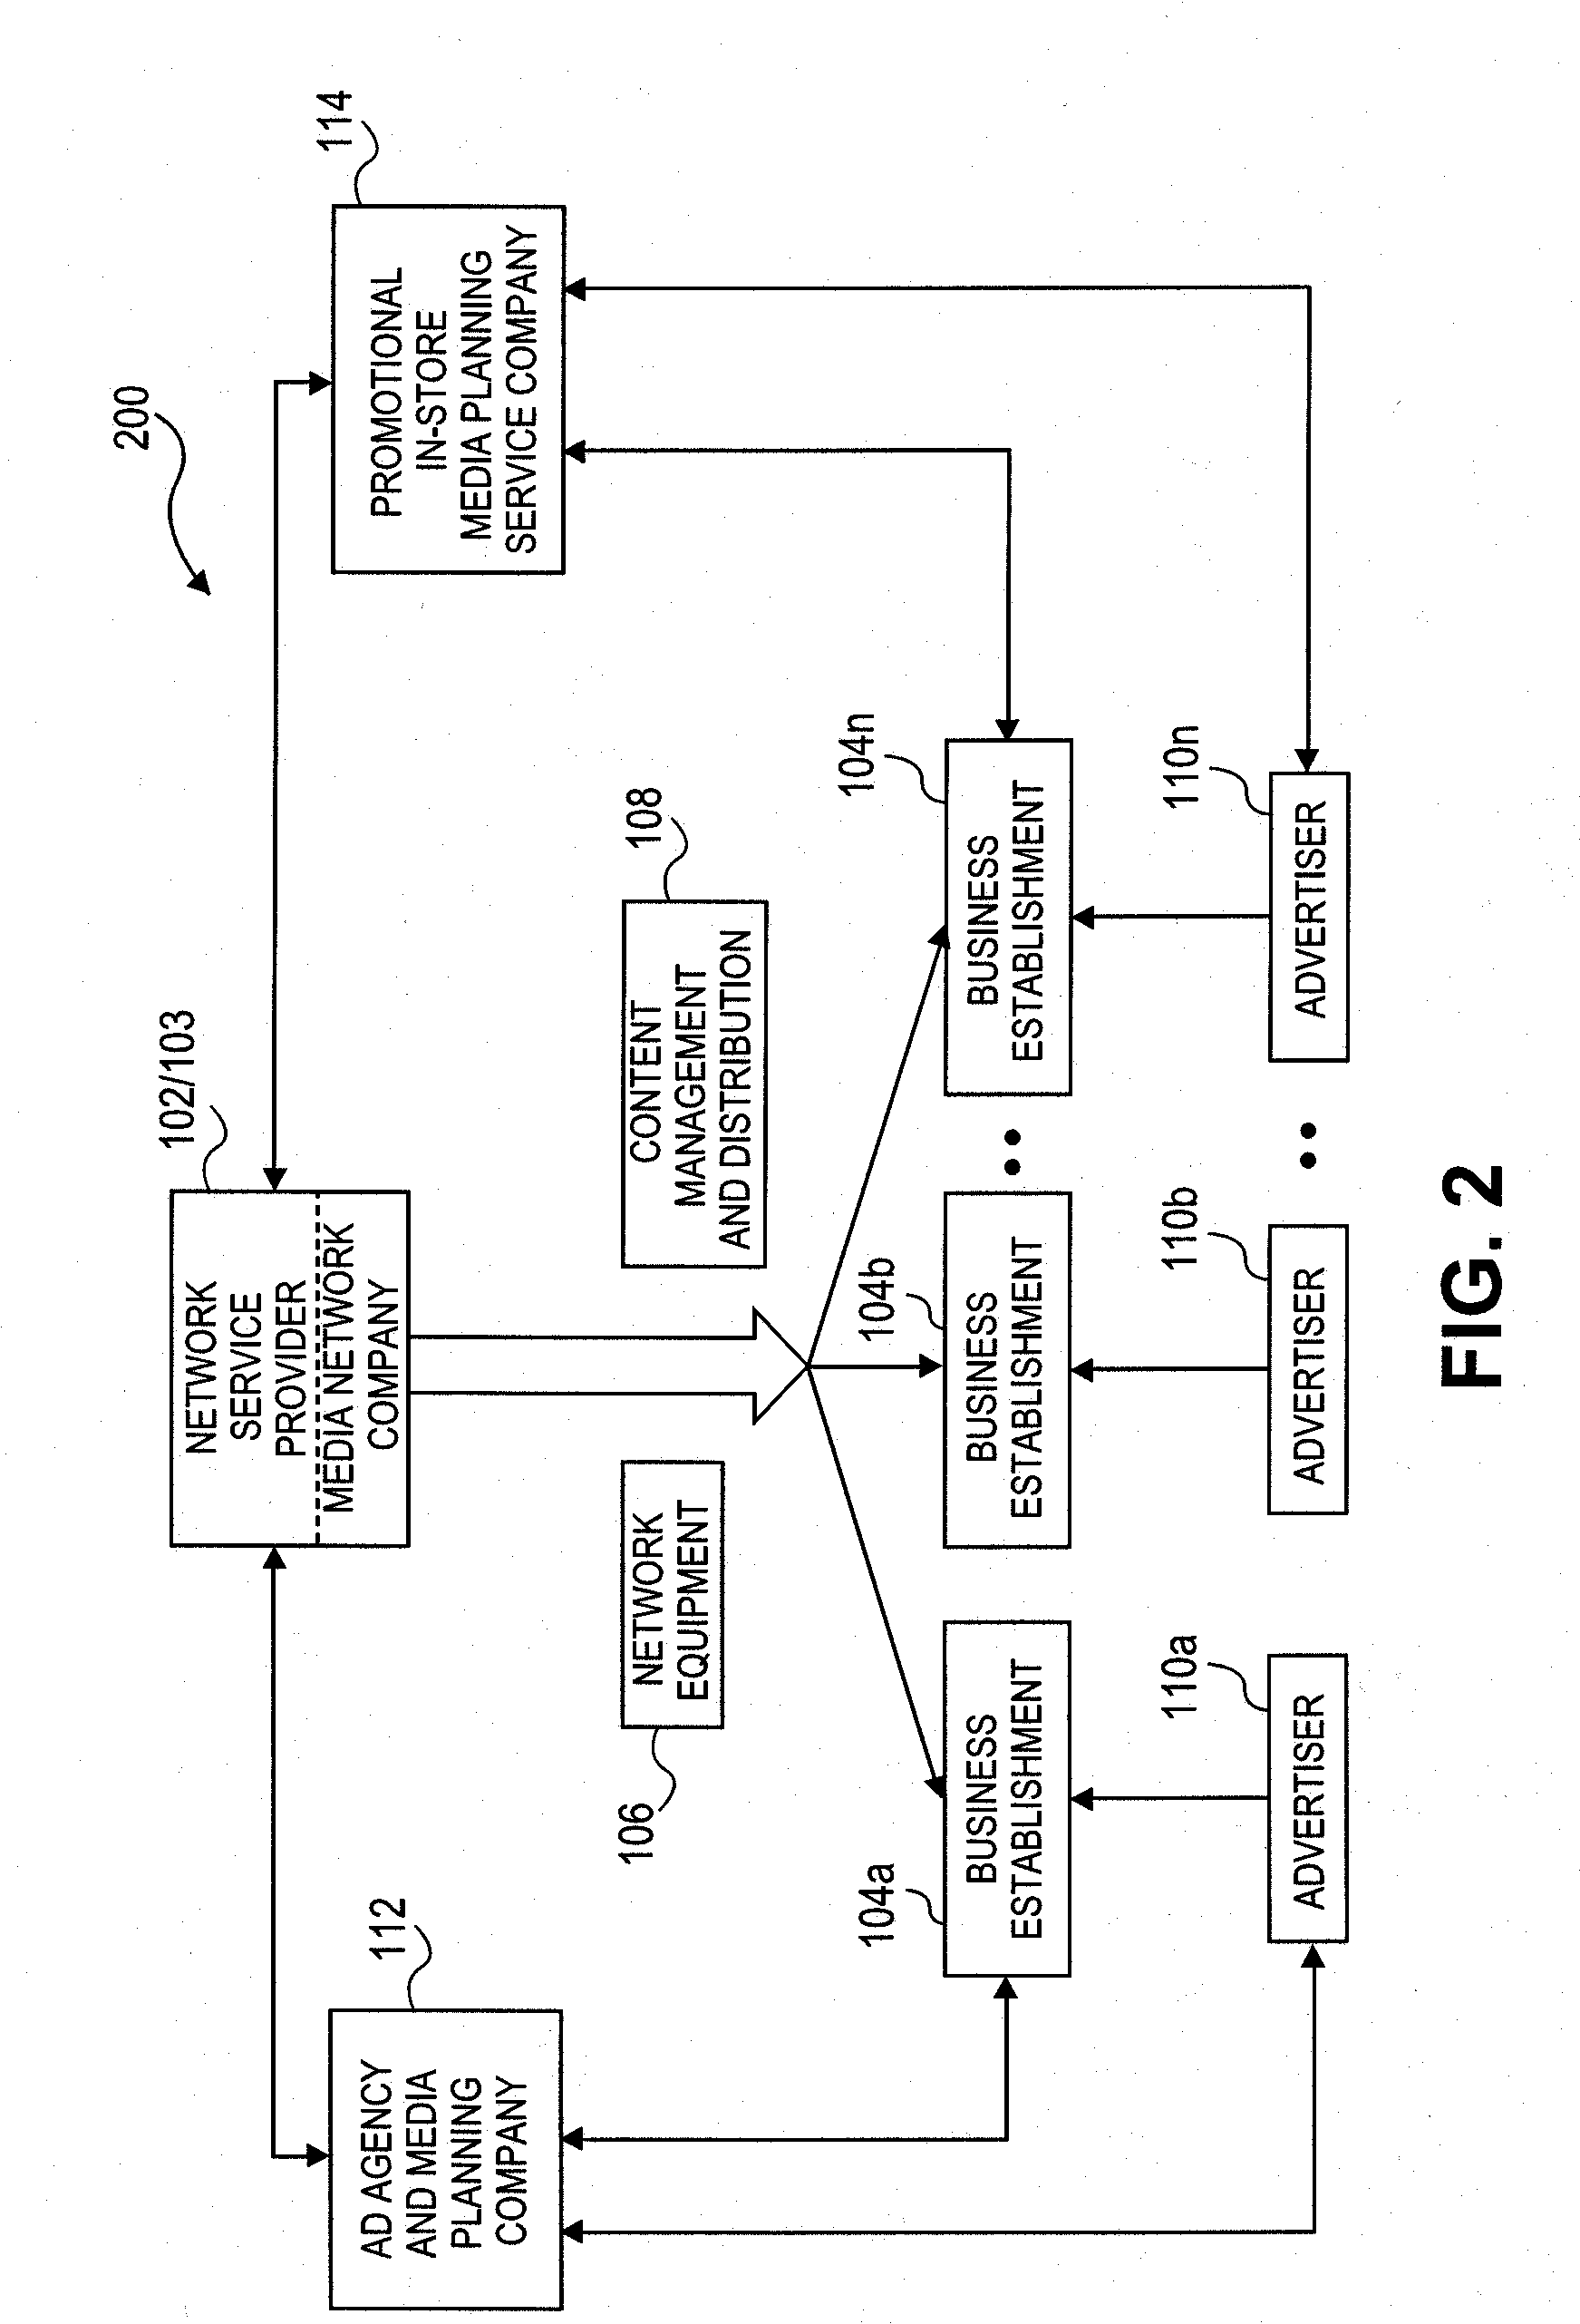 System and method for creating an in-store media network using traditional media metrics